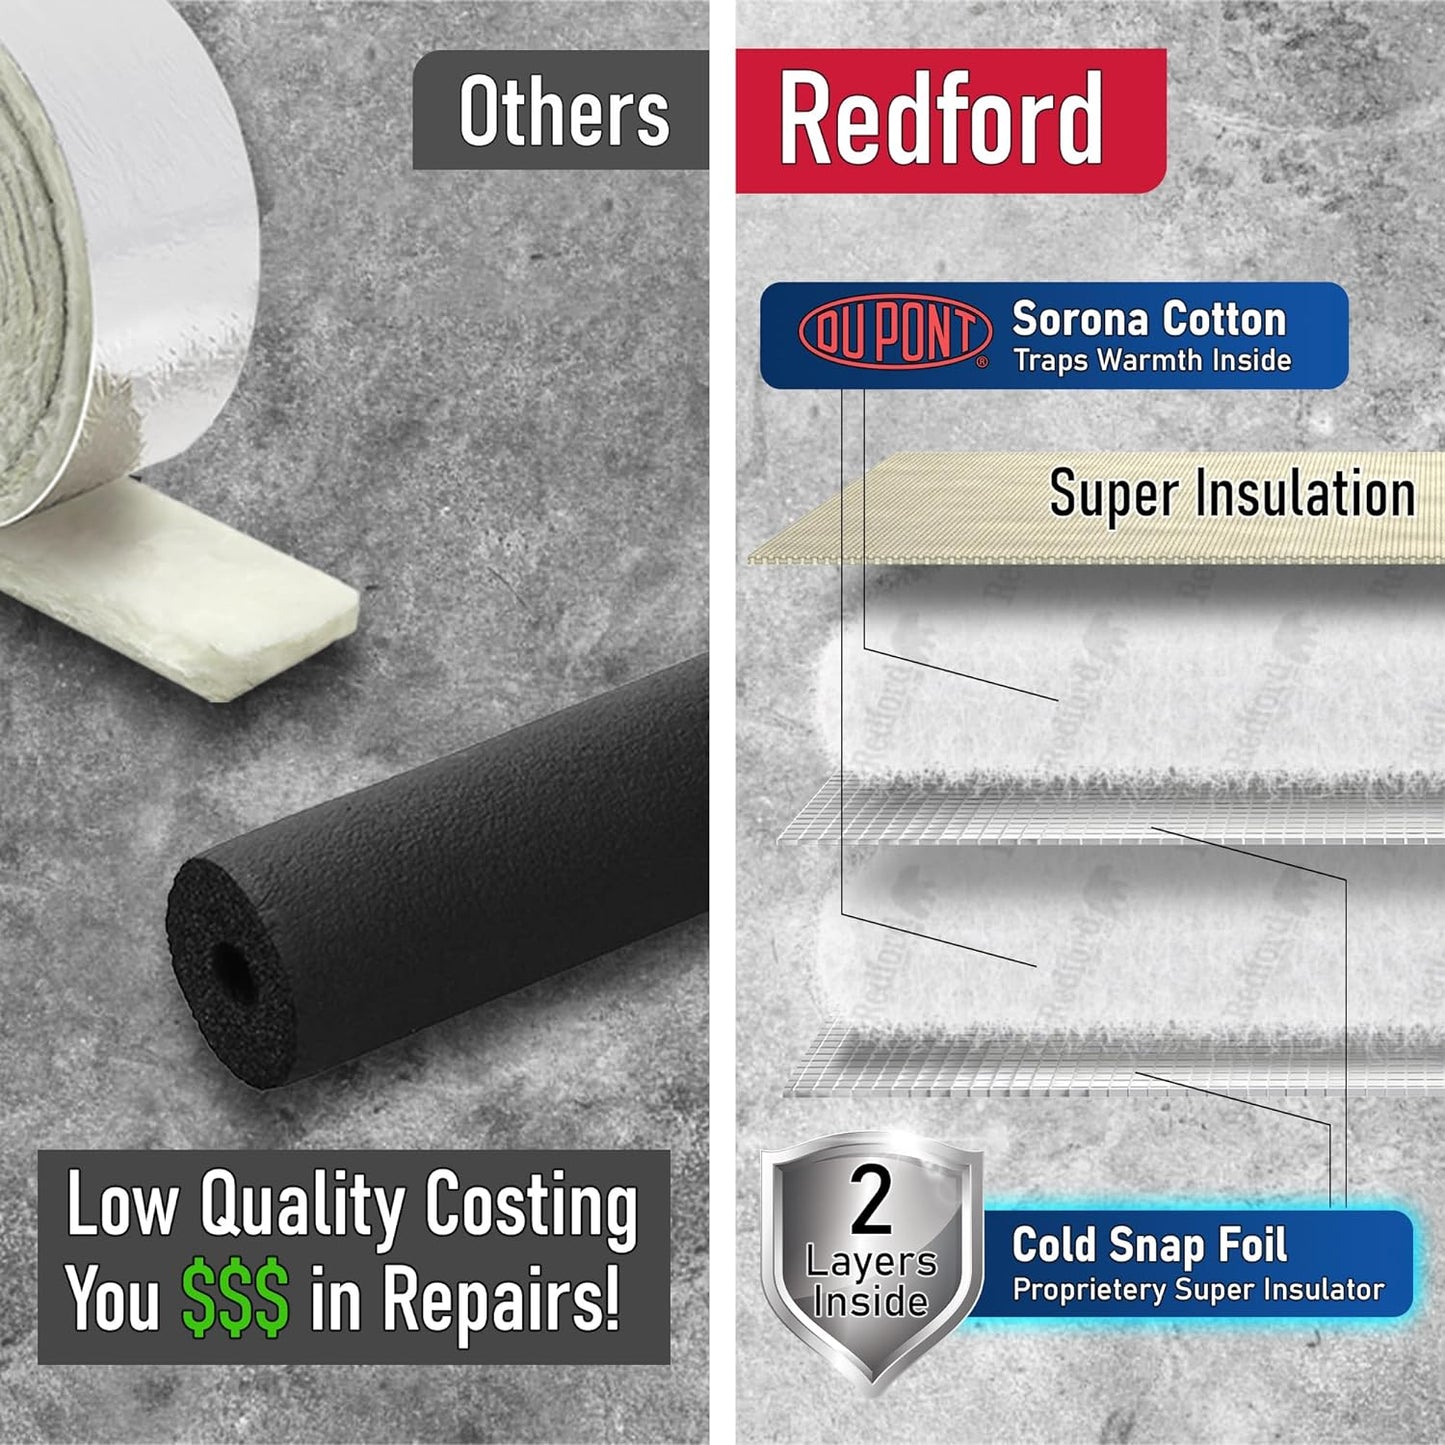 Redford Supply Co. Cold Snap (0°F) Double Wall Cotton Pipe Sleeve Cover - Outdoor Pipe Insulation Cover, Pipe Wrap Insulation, Water Pipe Insulation, Exterior Pipe Insulation Wrap (8"W x 16"H, Beige)